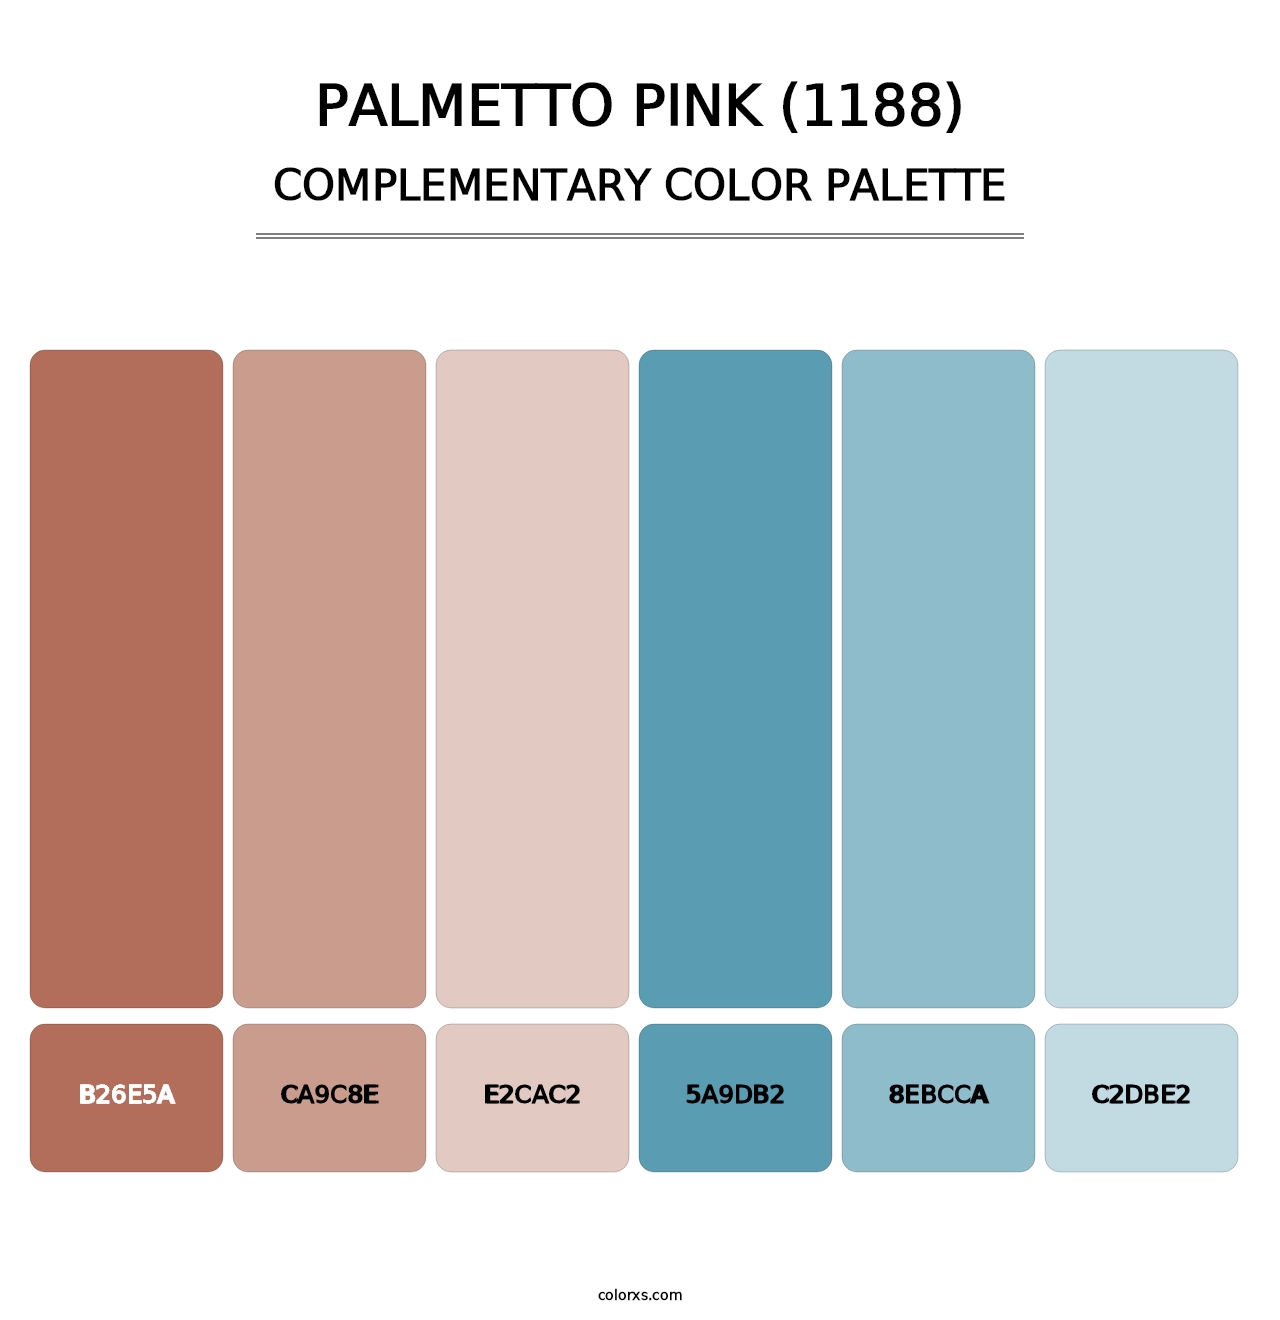 Palmetto Pink (1188) - Complementary Color Palette